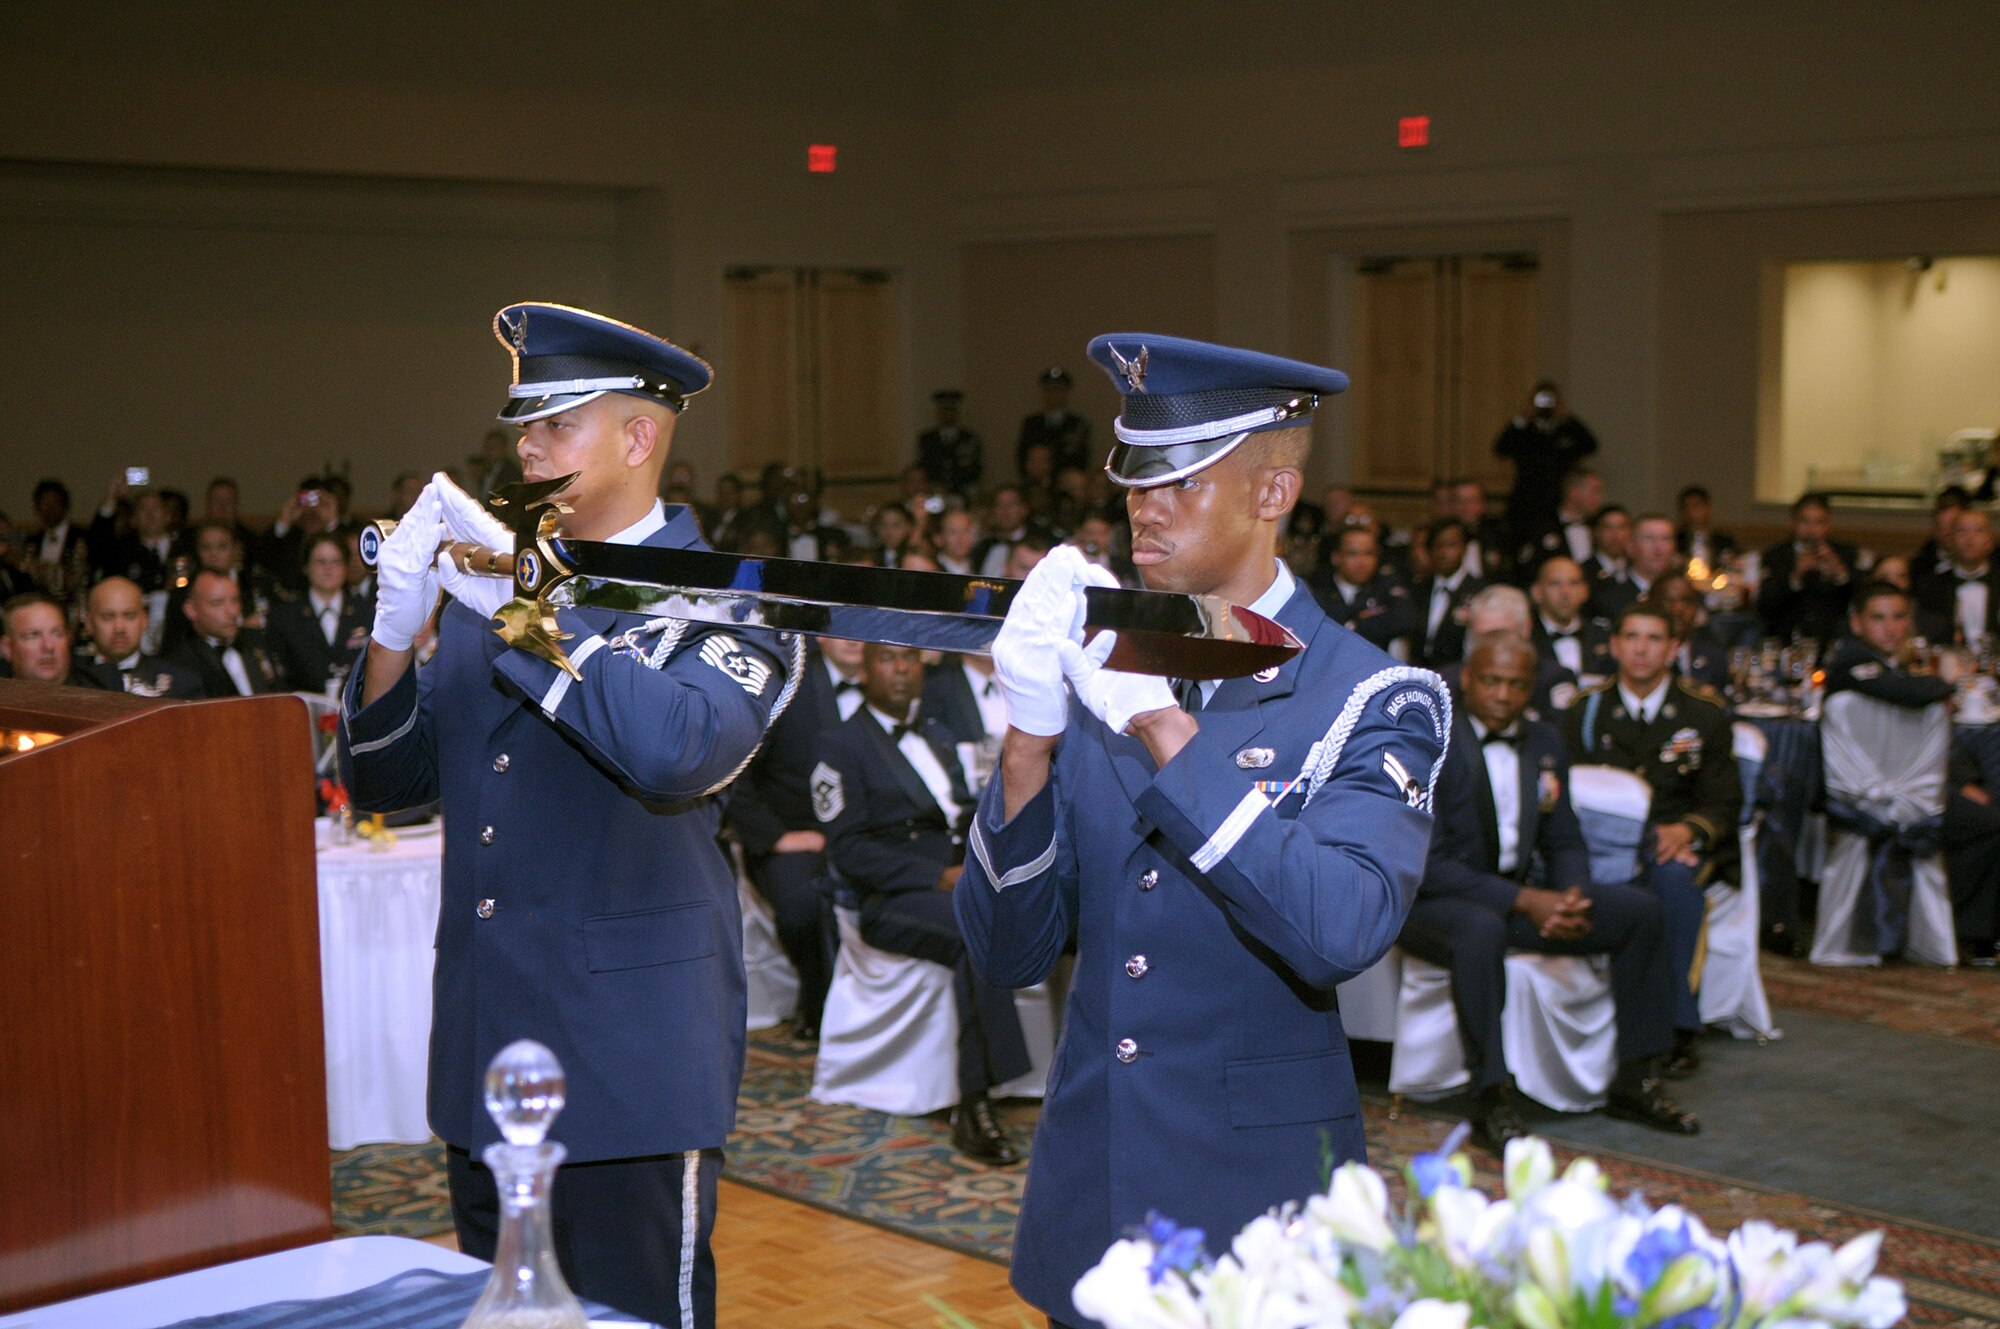 Air Education and Training Command honor guard Airmen, present the AETC command sword to the head table during Gen. Stephen R. Lorenz's Order of the Sword induction ceremony July 16, 2010 at the Gateway Club on Lackland Air Force Base, Texas. More than 300 Airmen from across AETC gathered to witness General Lorenz's induction into the Order of the Sword. General Lorenz is the Air Education and Training Command commander. (U.S. Air Force photo/Joel Martinez)